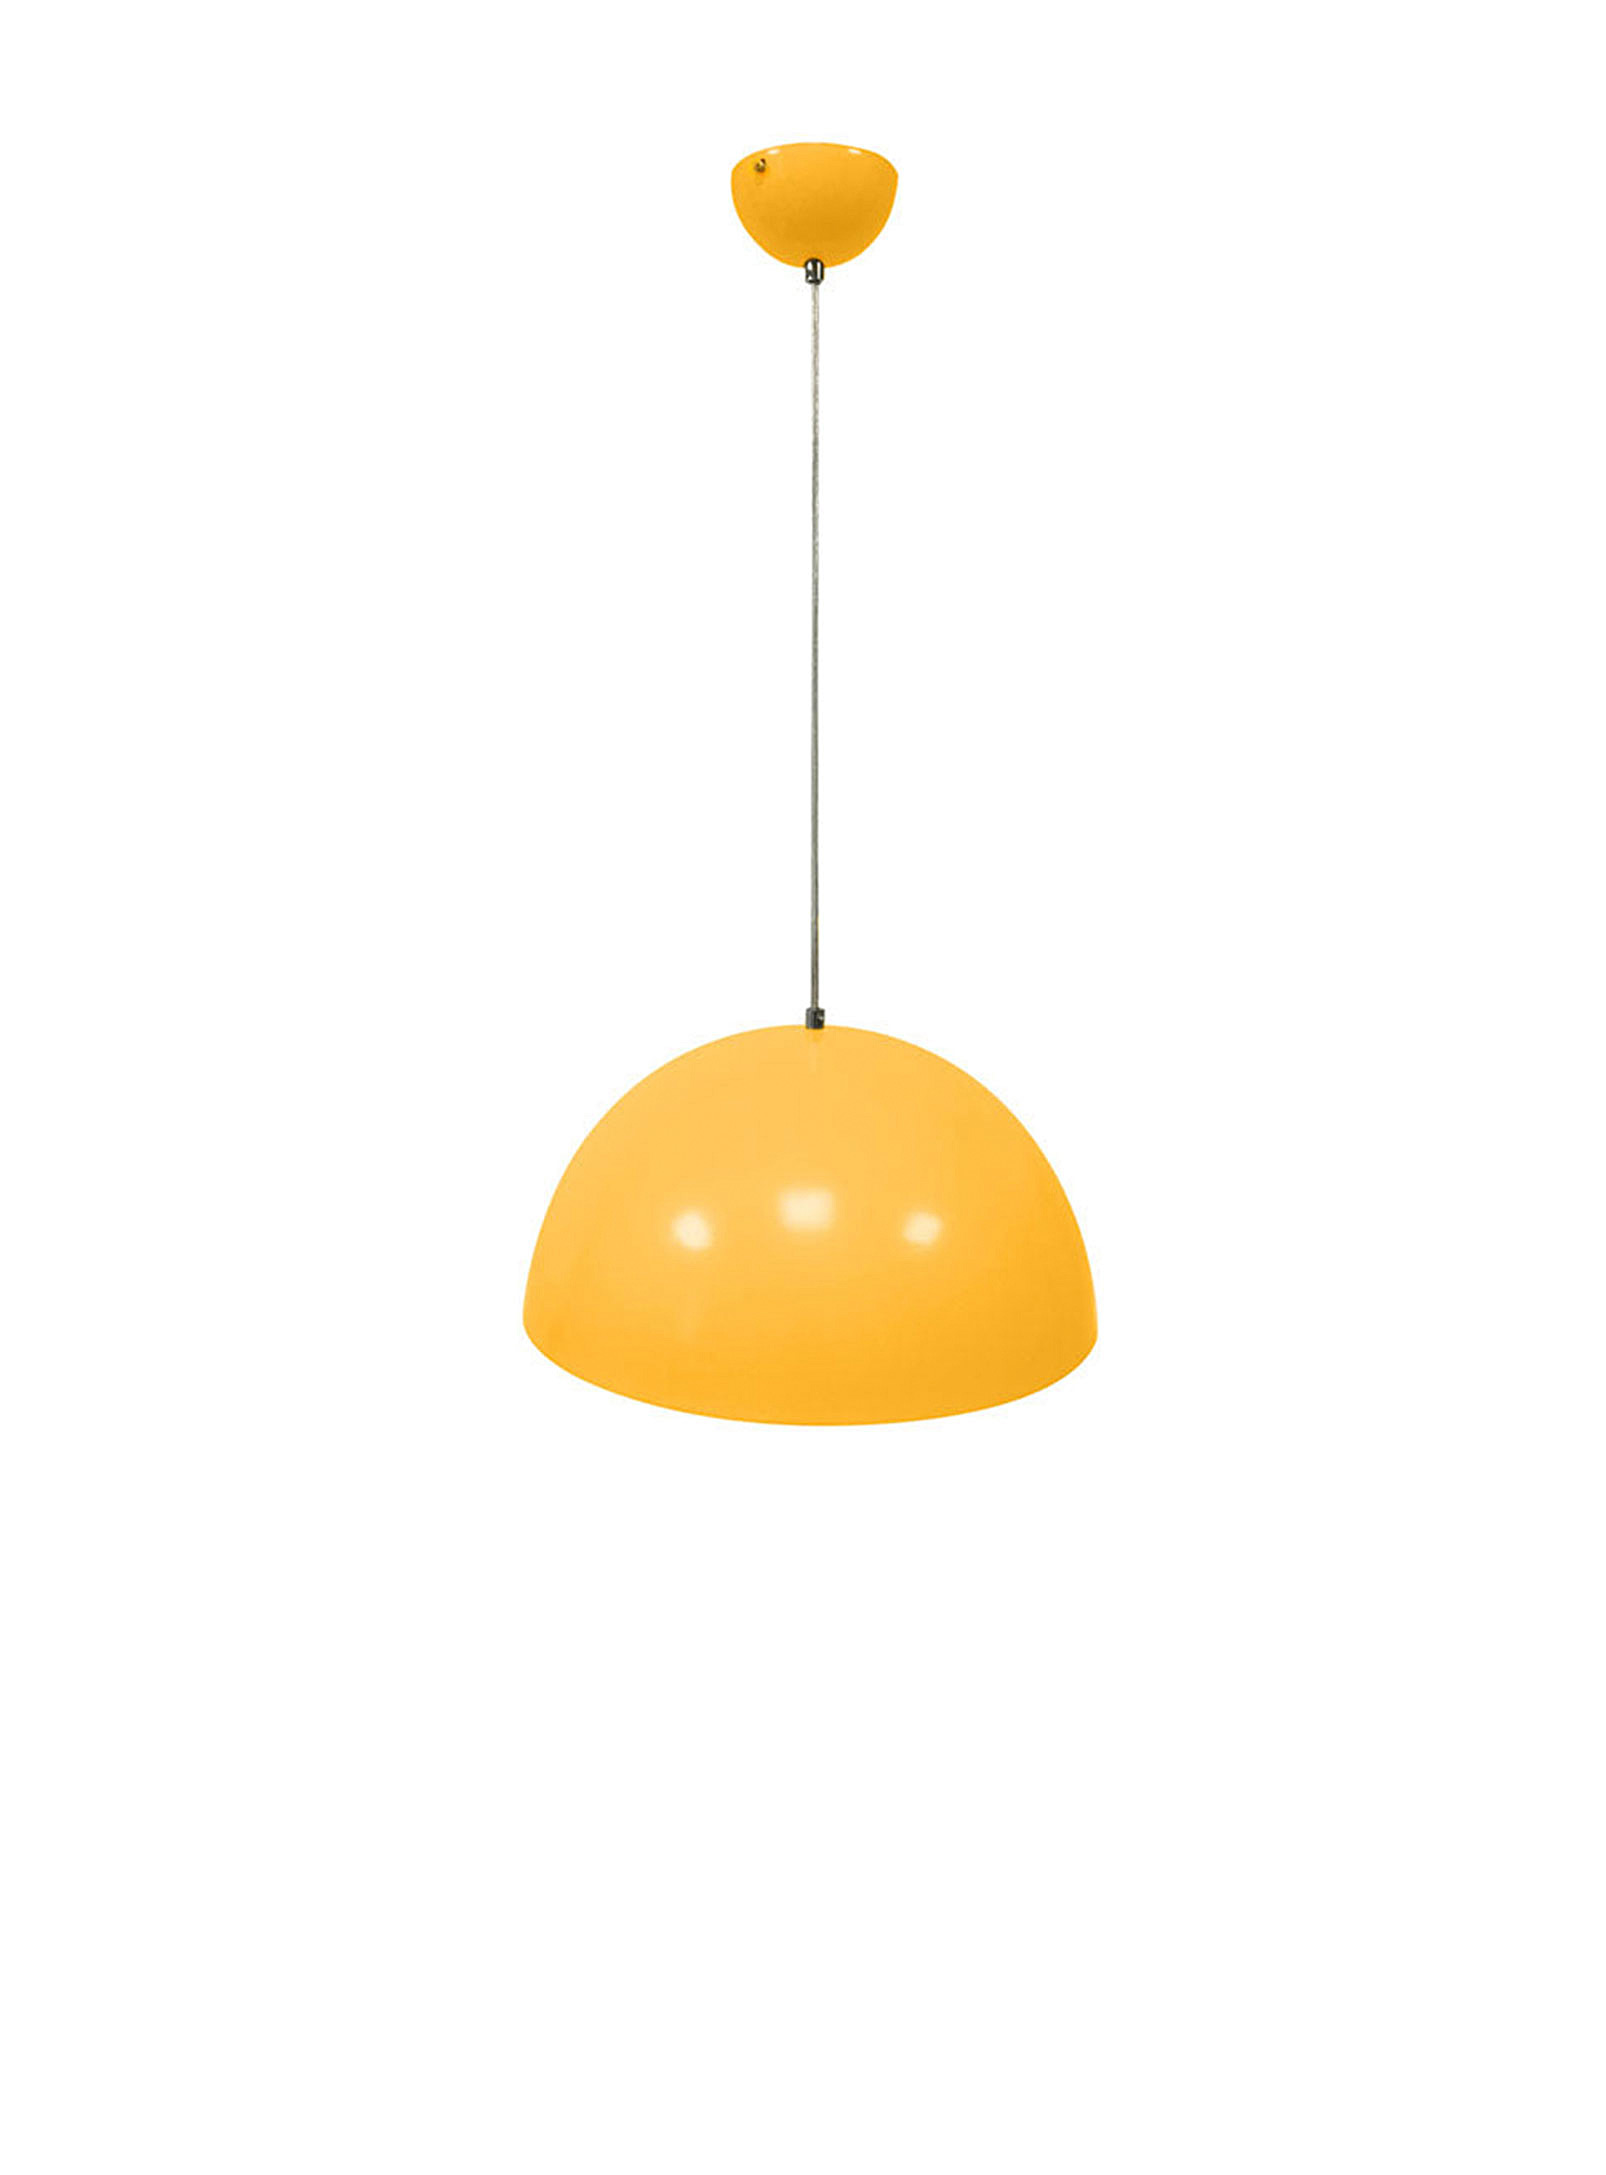 Simons Maison Colourful Retro Hanging Lamp In Bright Yellow